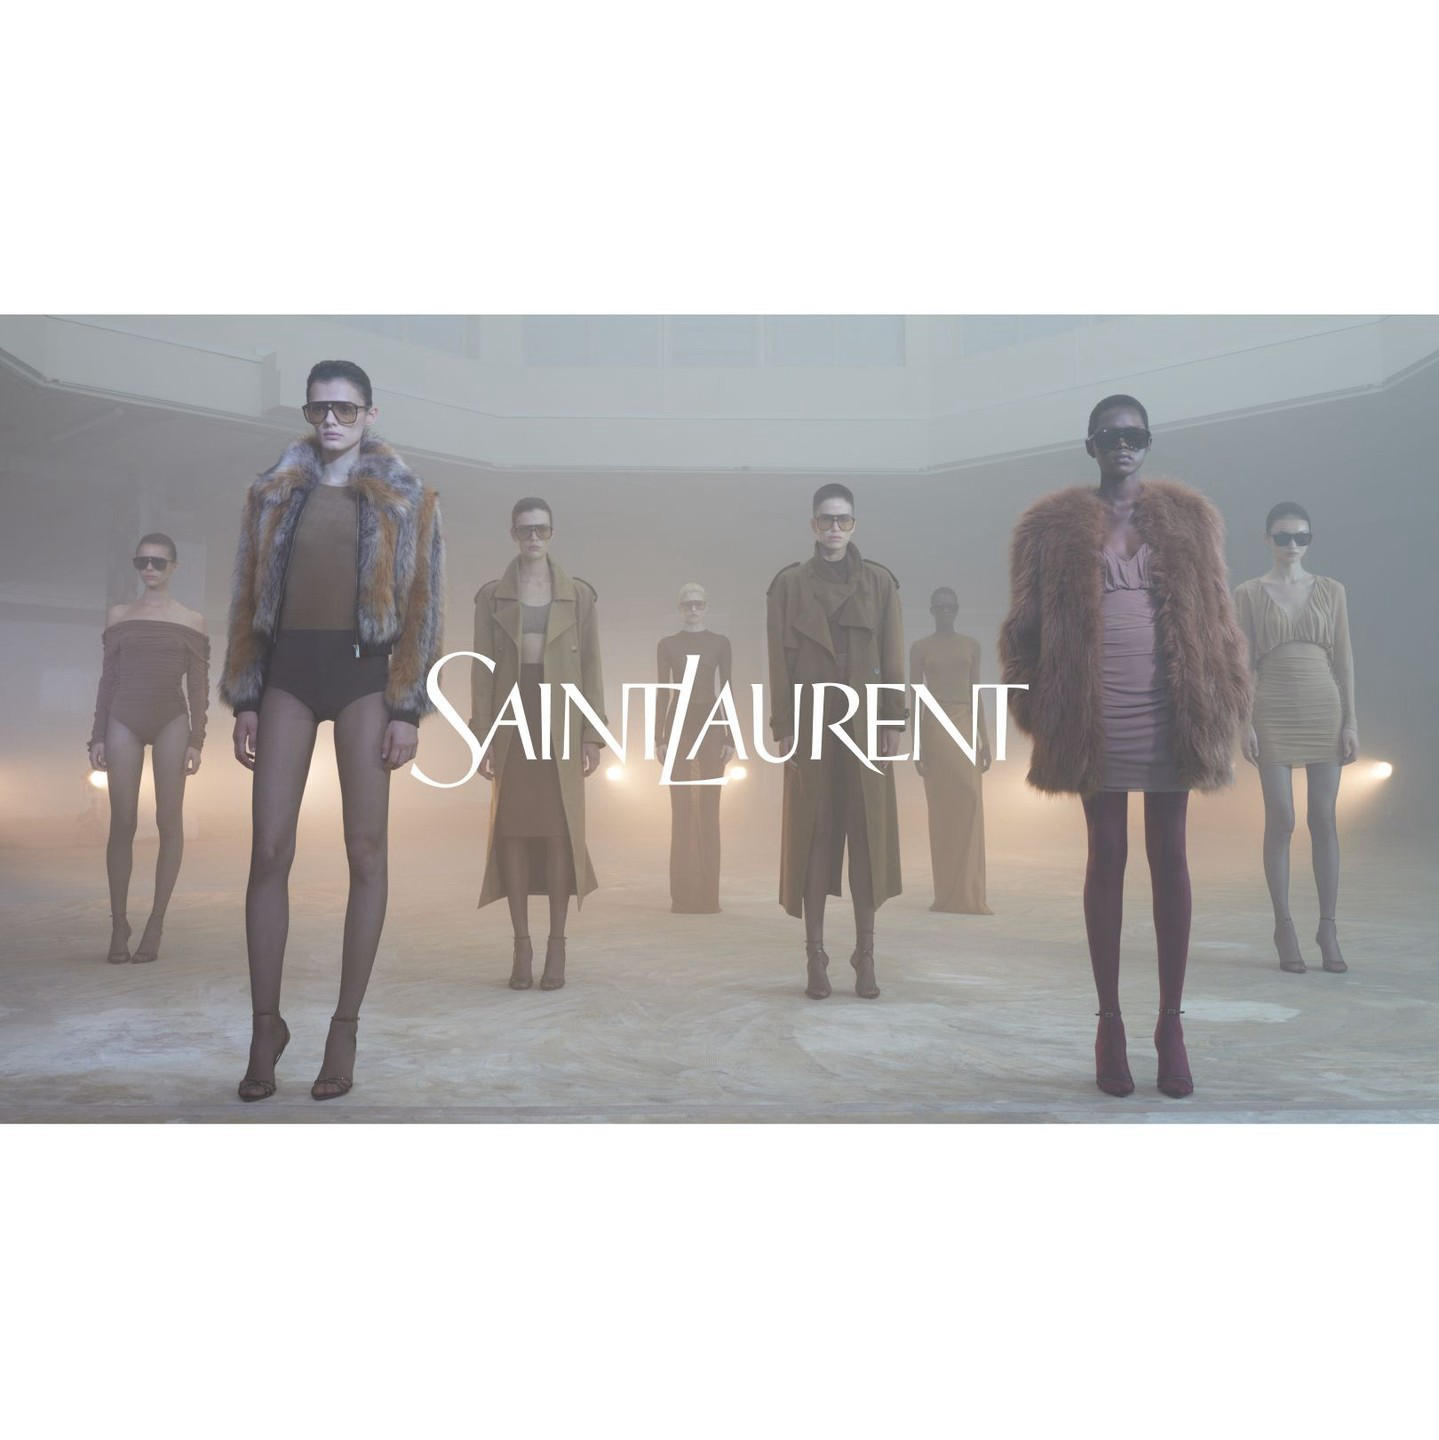 image  1 SAINT LAURENT - Spring 23⁣⁣⁣⁣⁣by Anthony Vaccarello⁣⁣⁣⁣Photographed by Vanessa Beecroft⁣⁣⁣⁣⁣#YSL #Sa